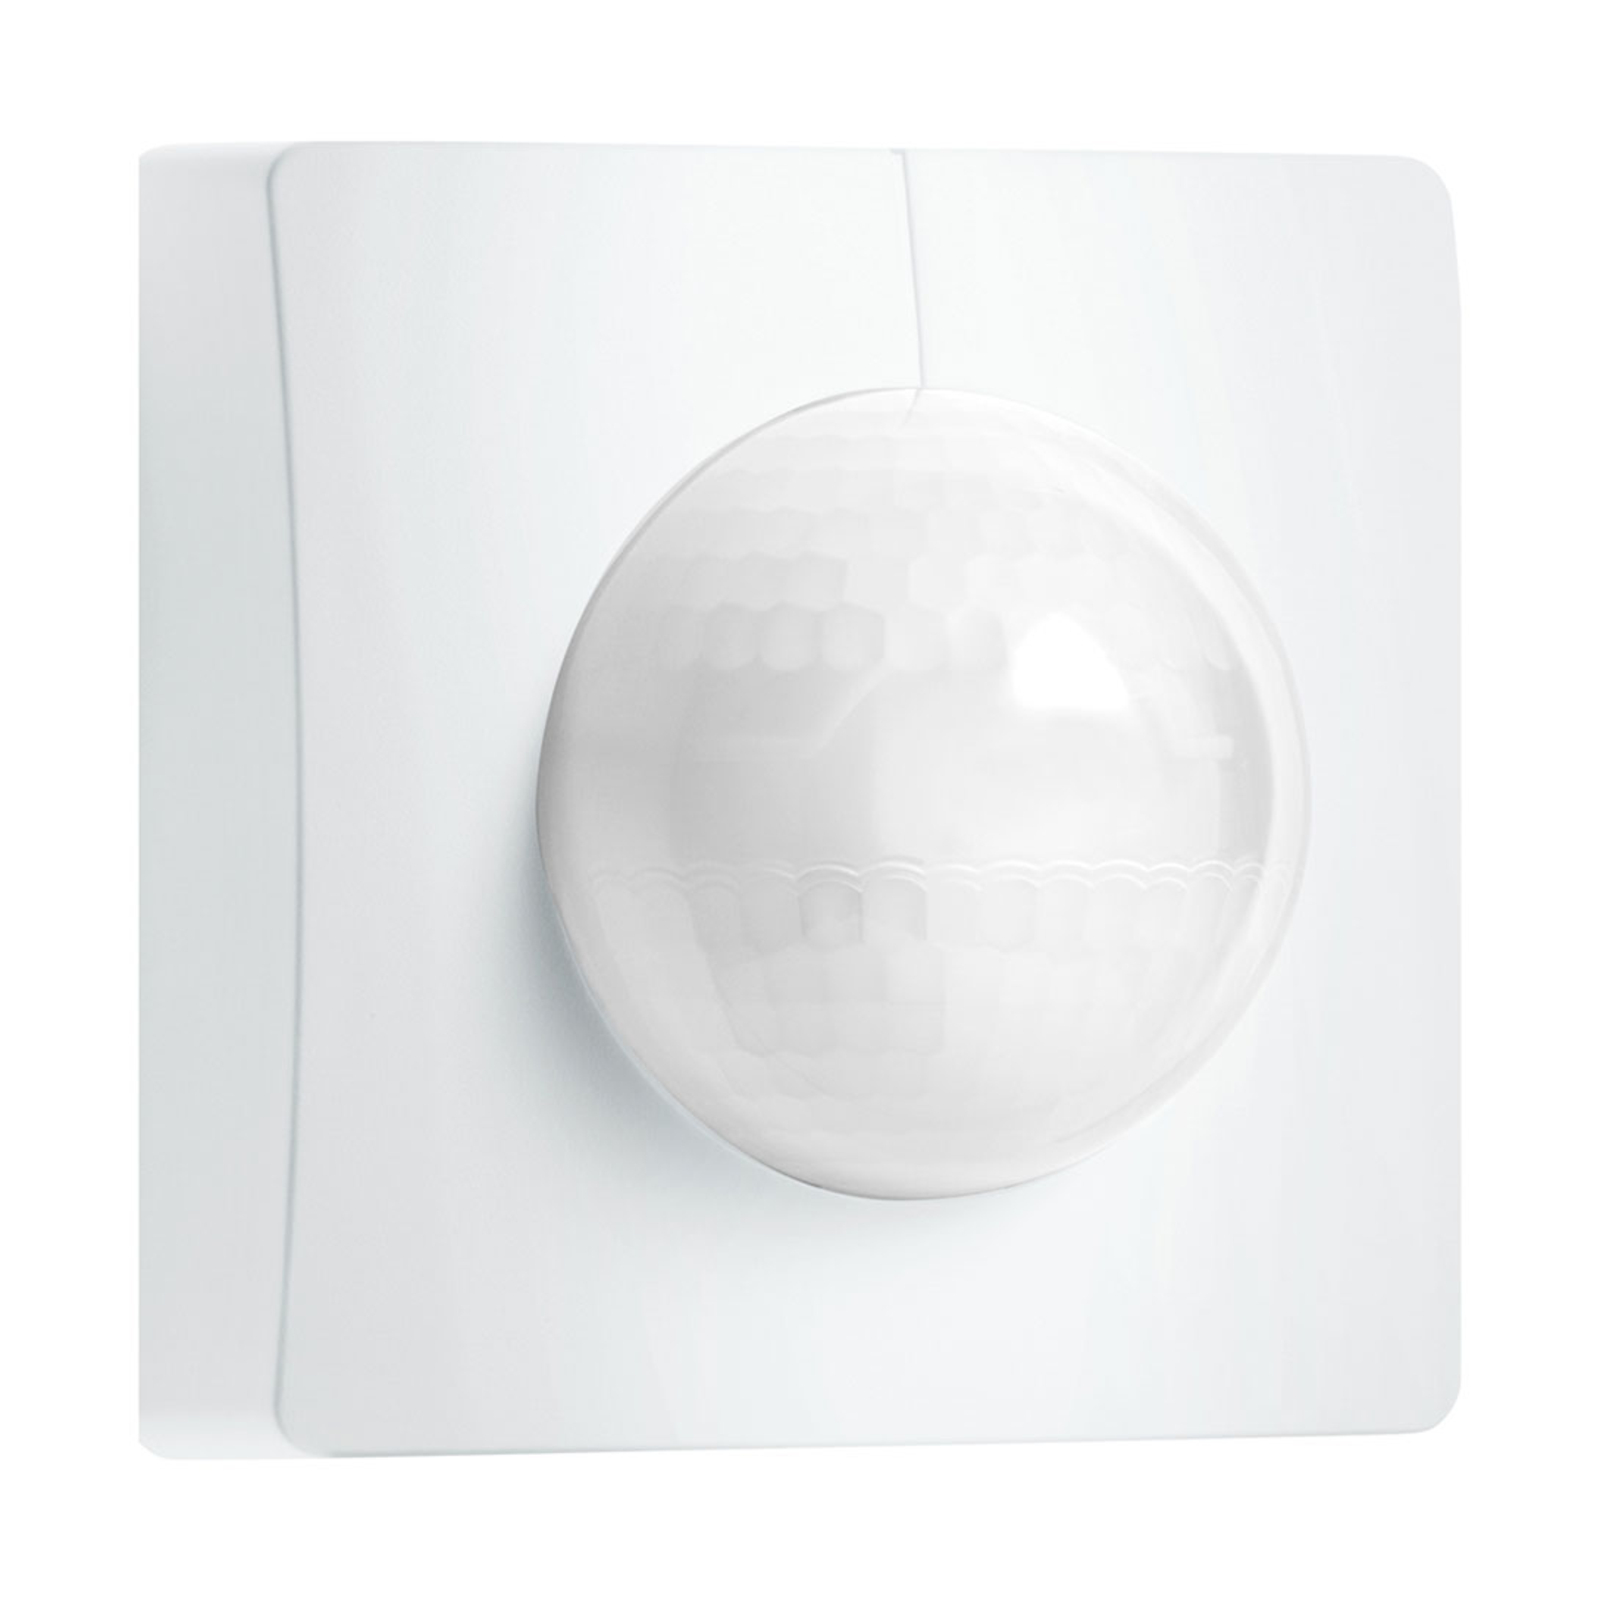 IS 3180 COM1 motion detector surface-mount angular